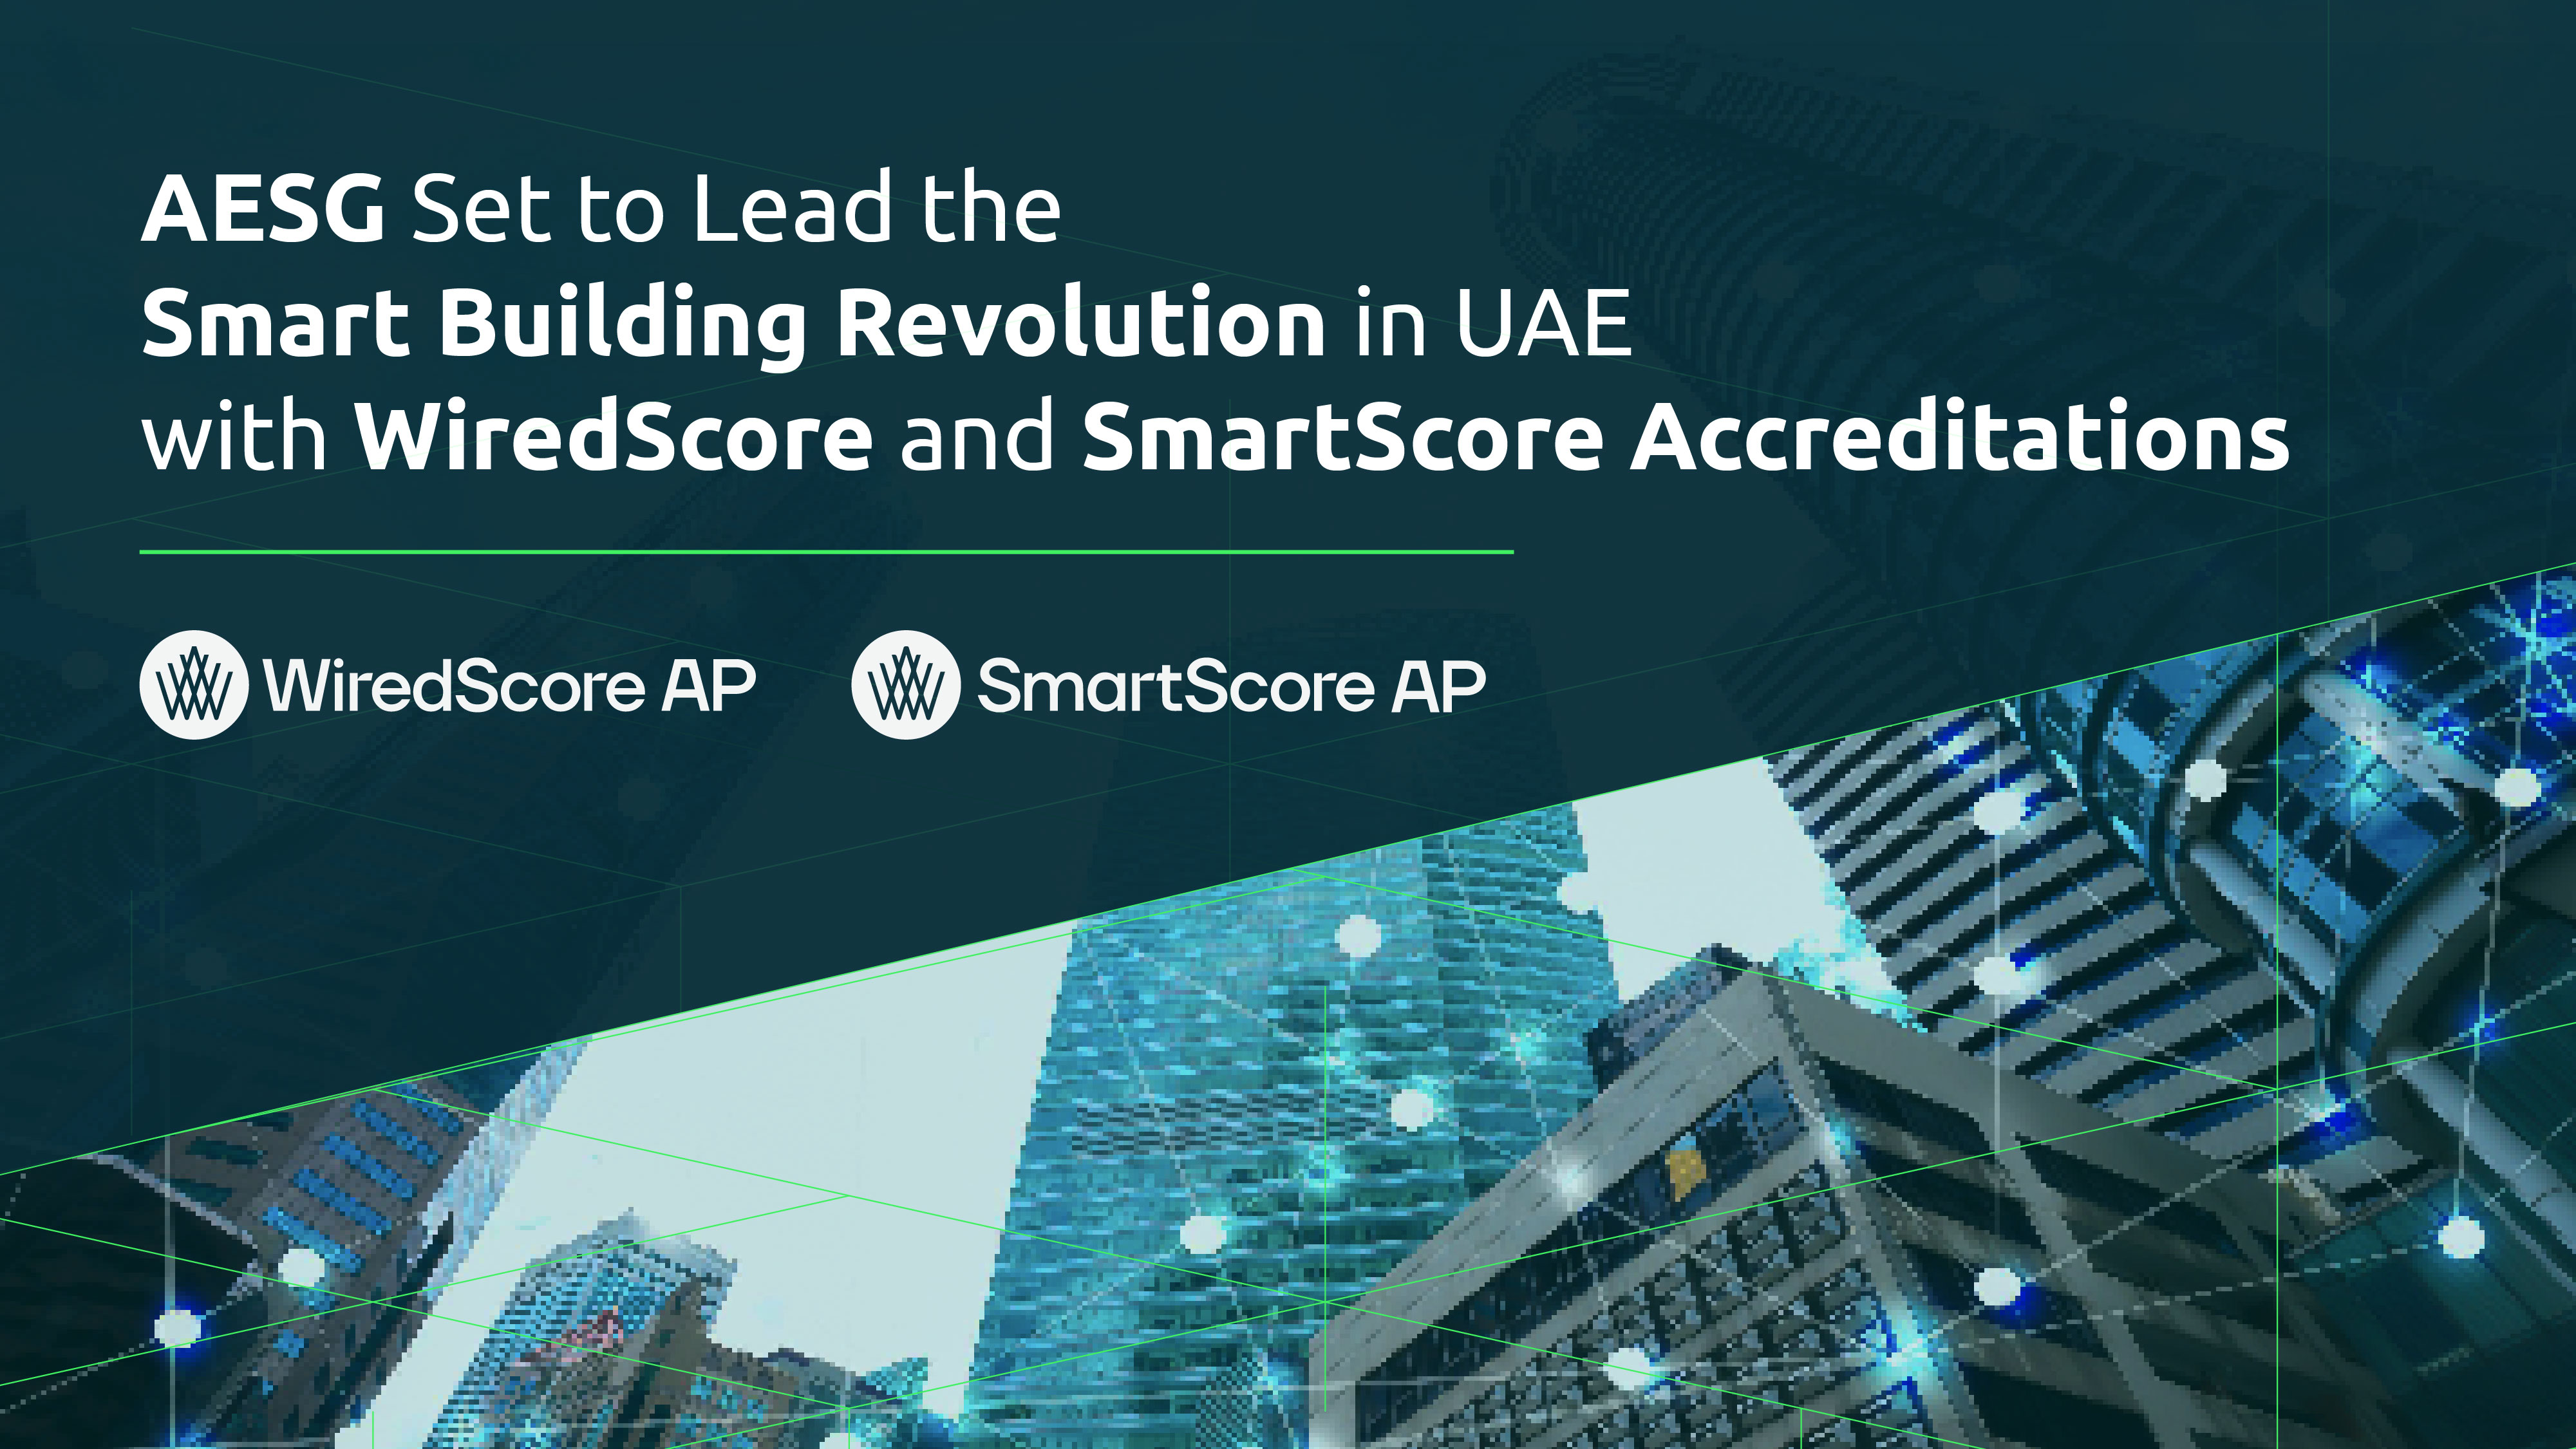 AESG Set to Lead the Smart Building Revolution in UAE with WiredScore and SmartScore Accreditations